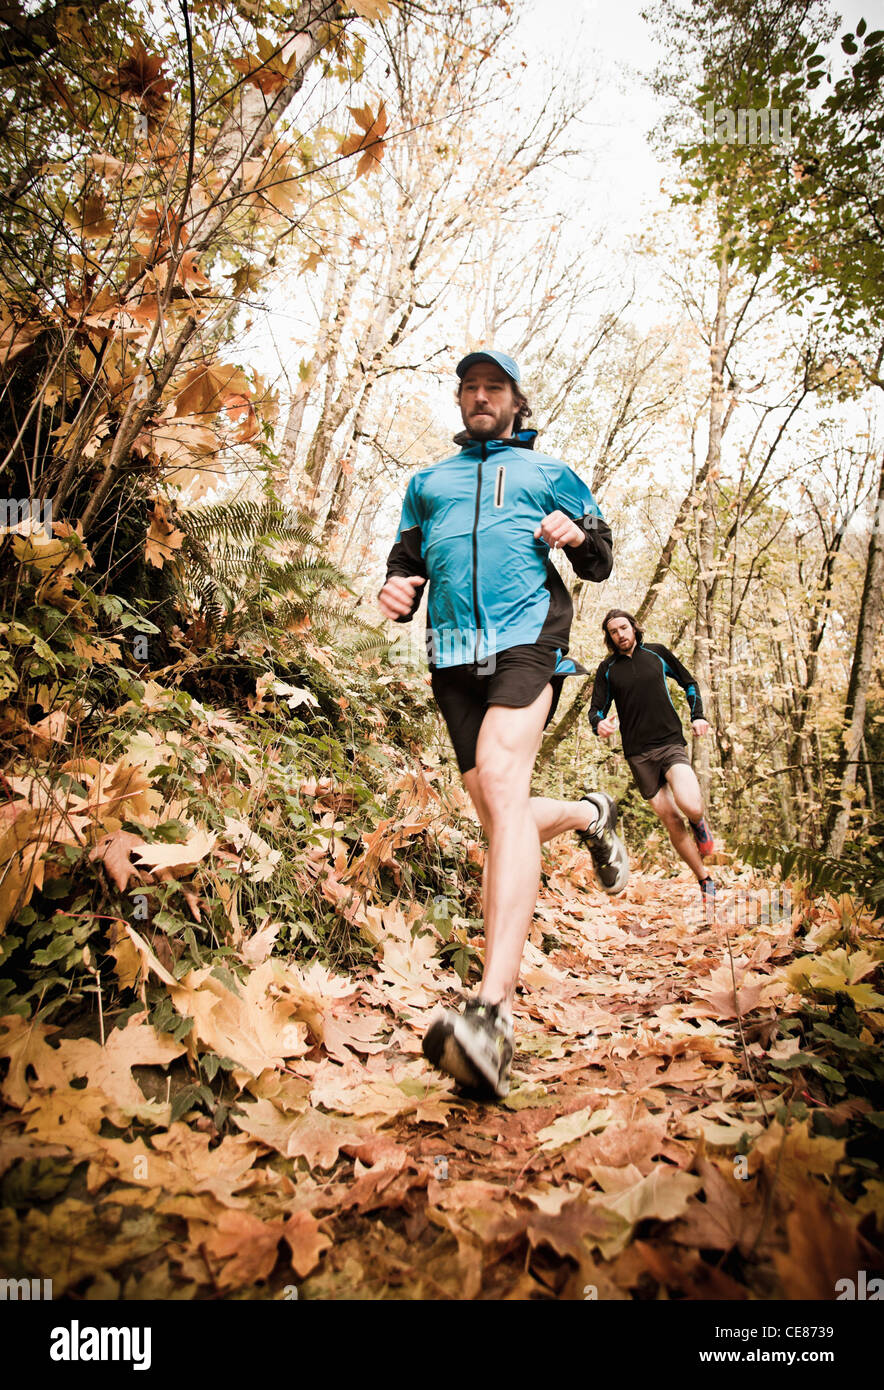 Two men trail running through a forest in the Fall colors. Stock Photo